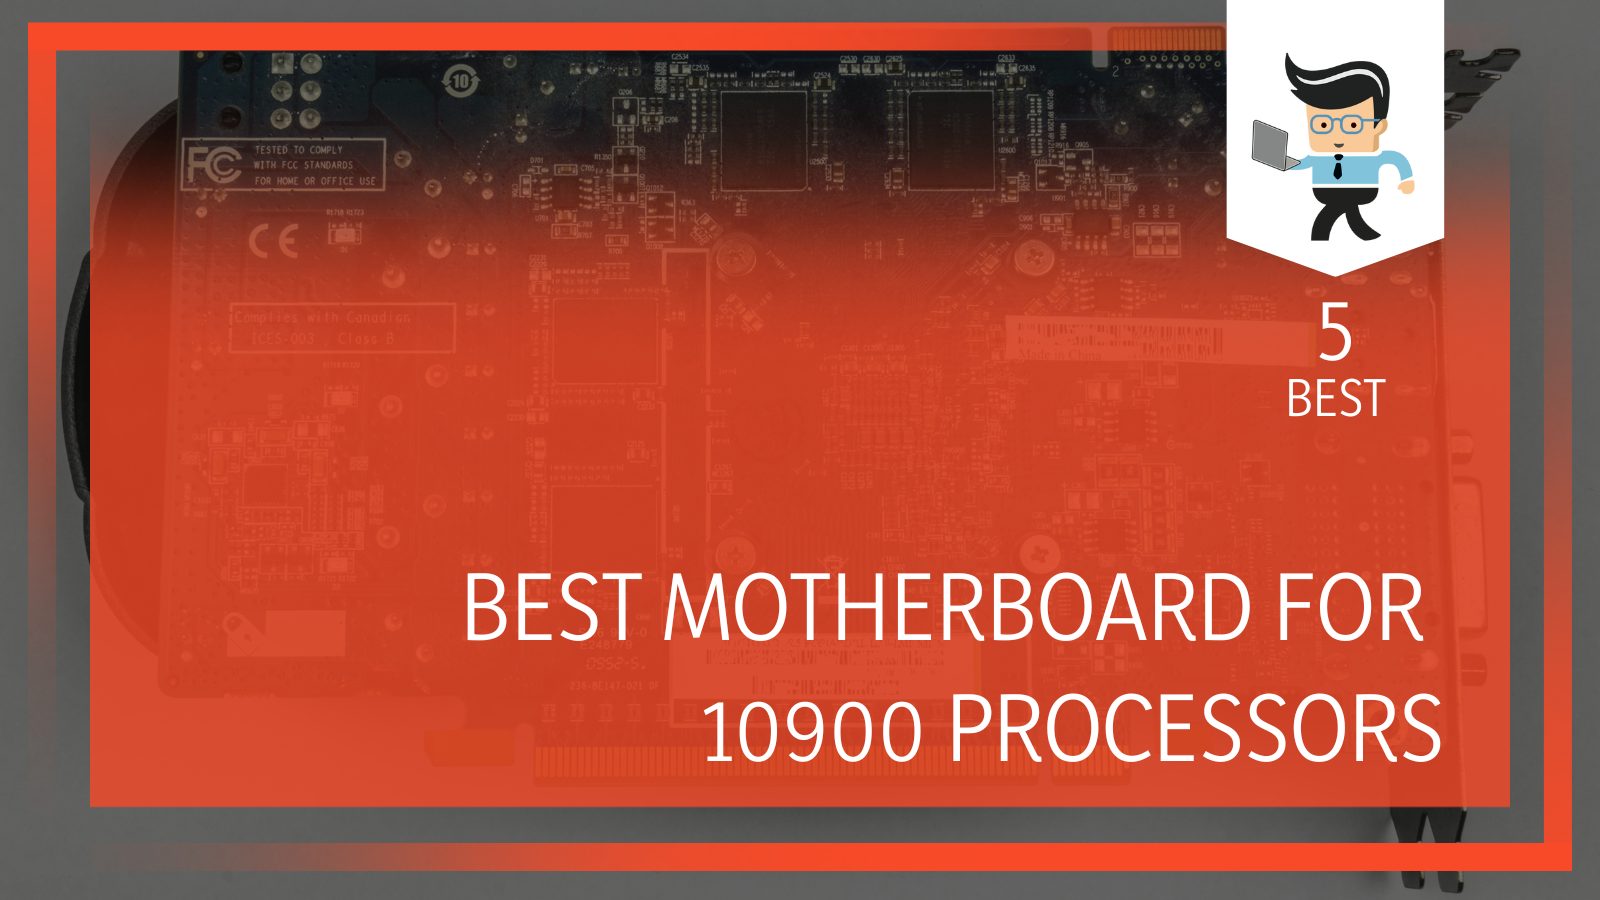 The Best Motherboard for Processors